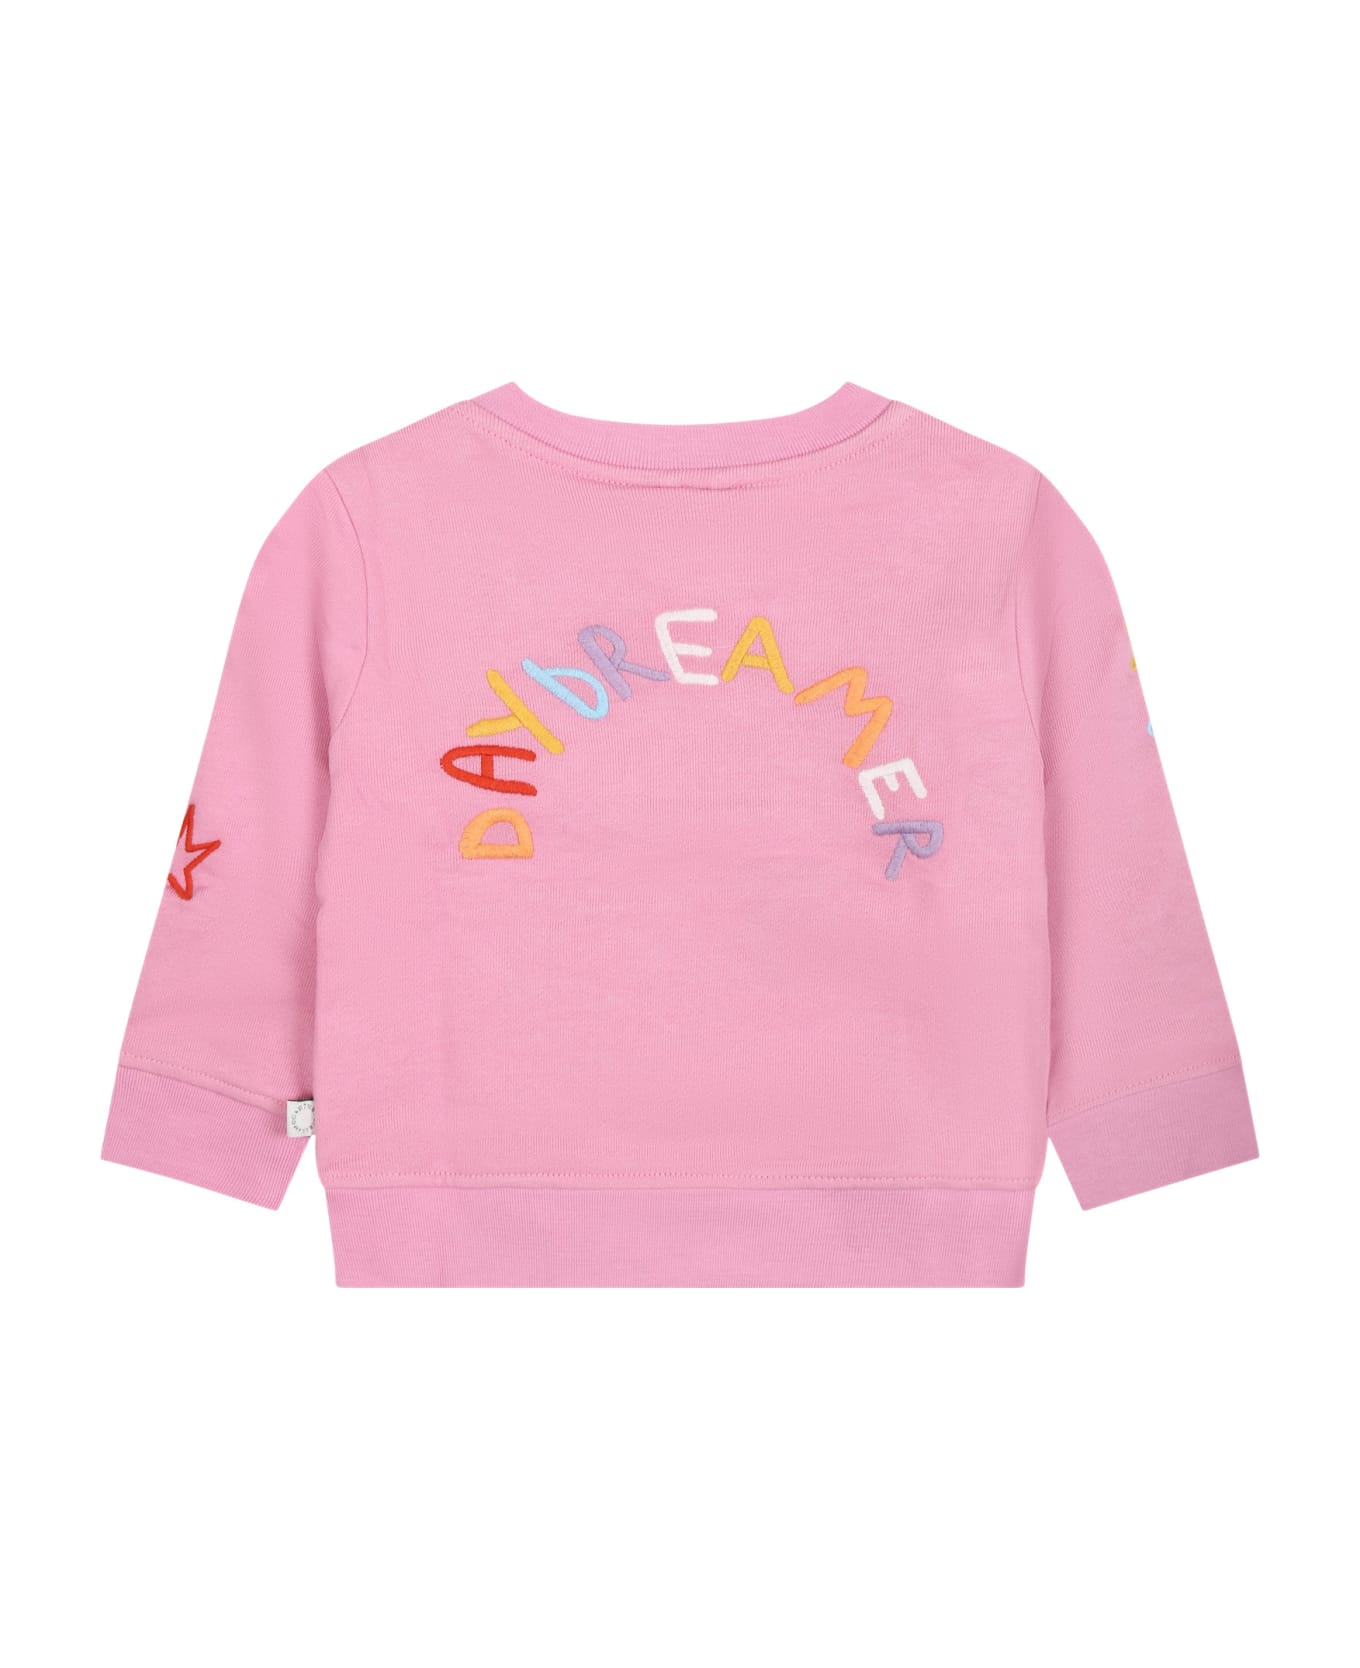 Stella McCartney Kids Pink Sweatshirt For Baby Girl With All-over Multicolor Embroidery - Pink